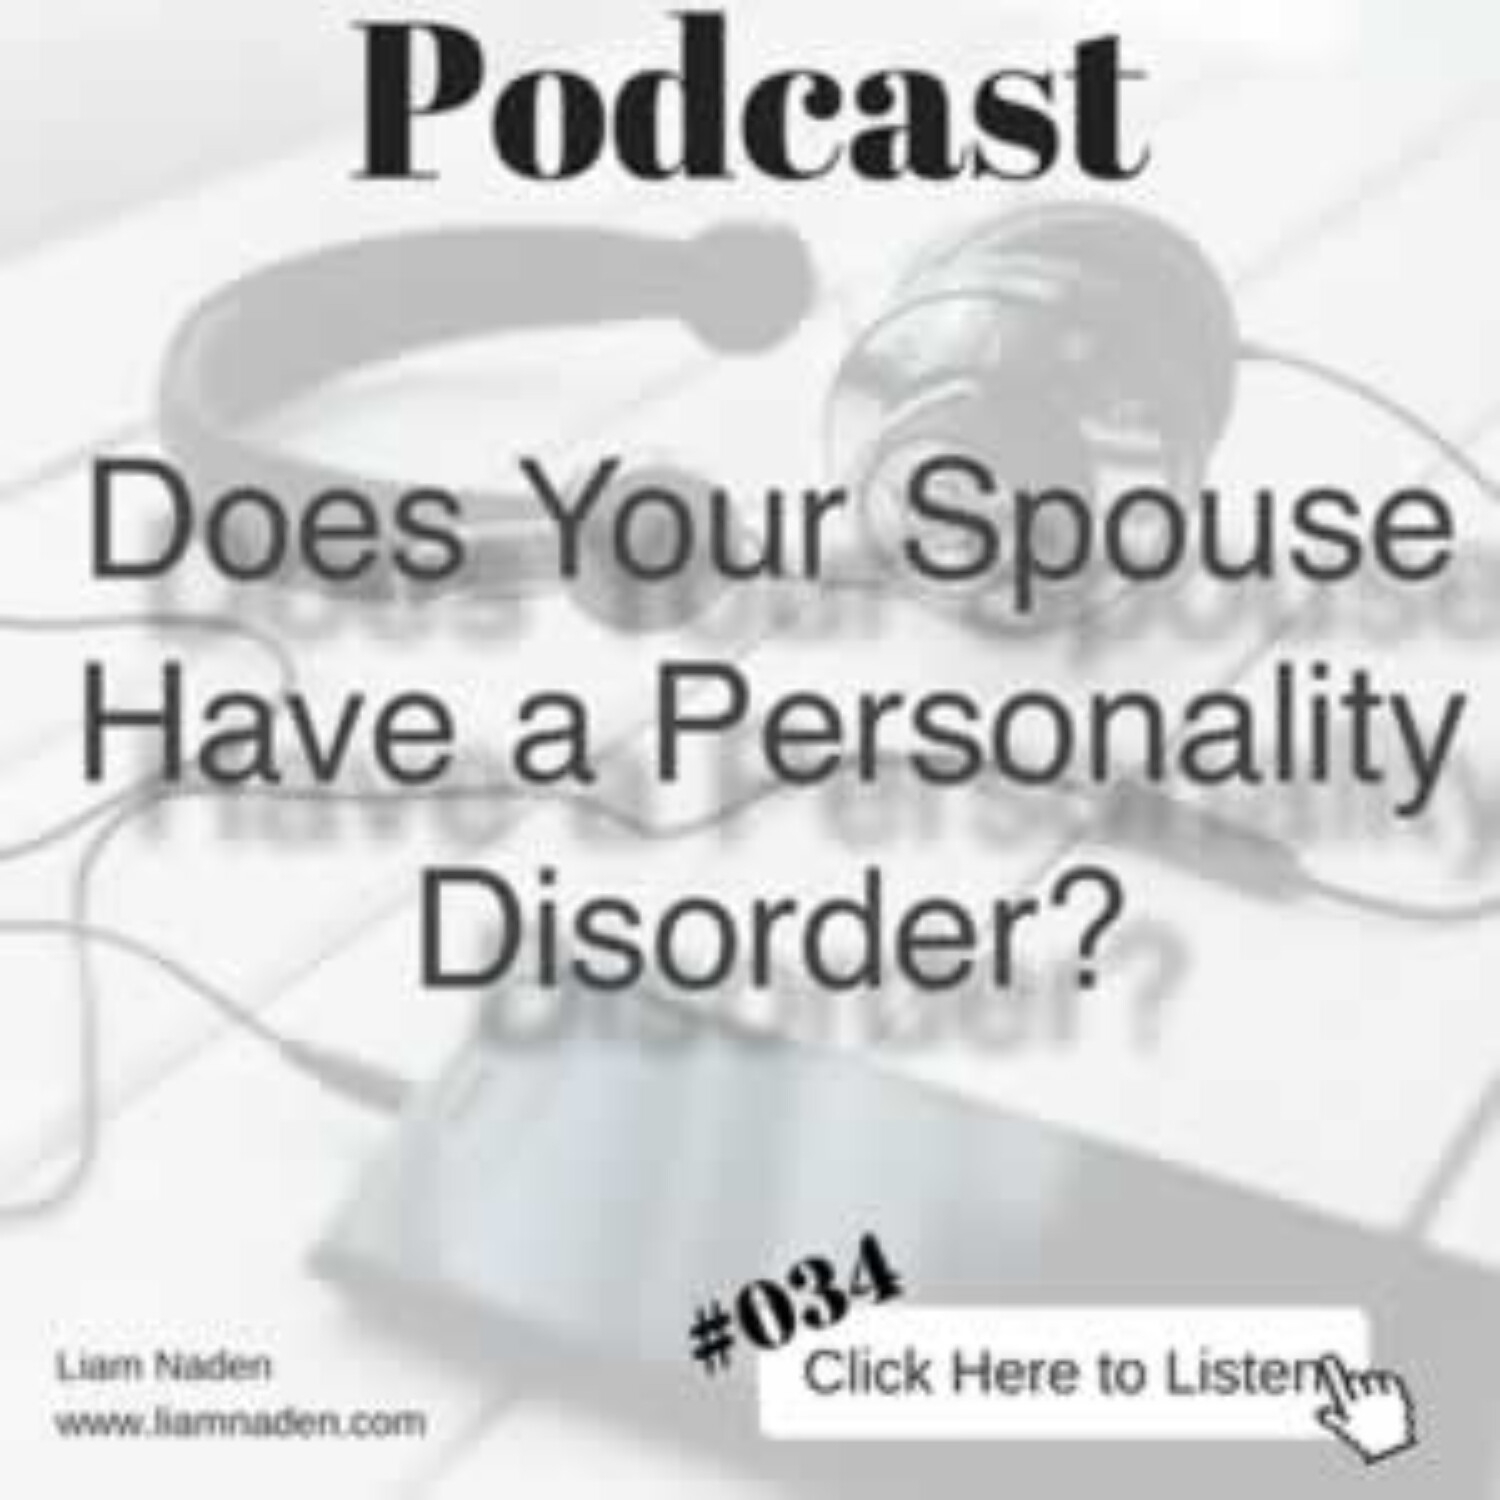 GILFL 034 : Does Your Spouse Have a Personality Disorder?